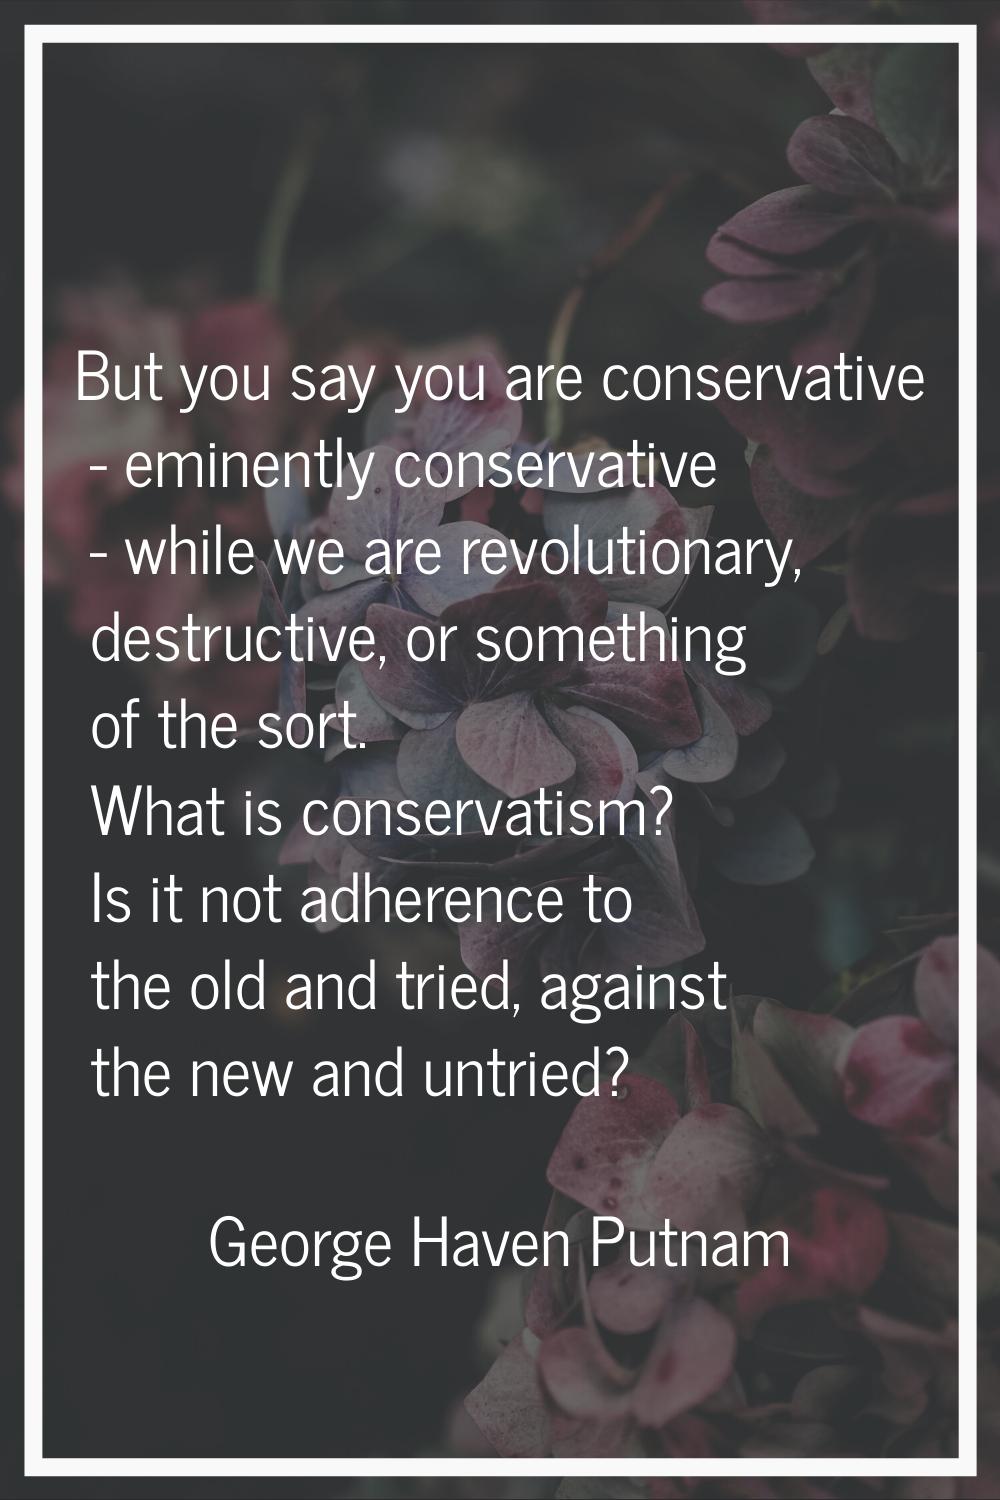 But you say you are conservative - eminently conservative - while we are revolutionary, destructive